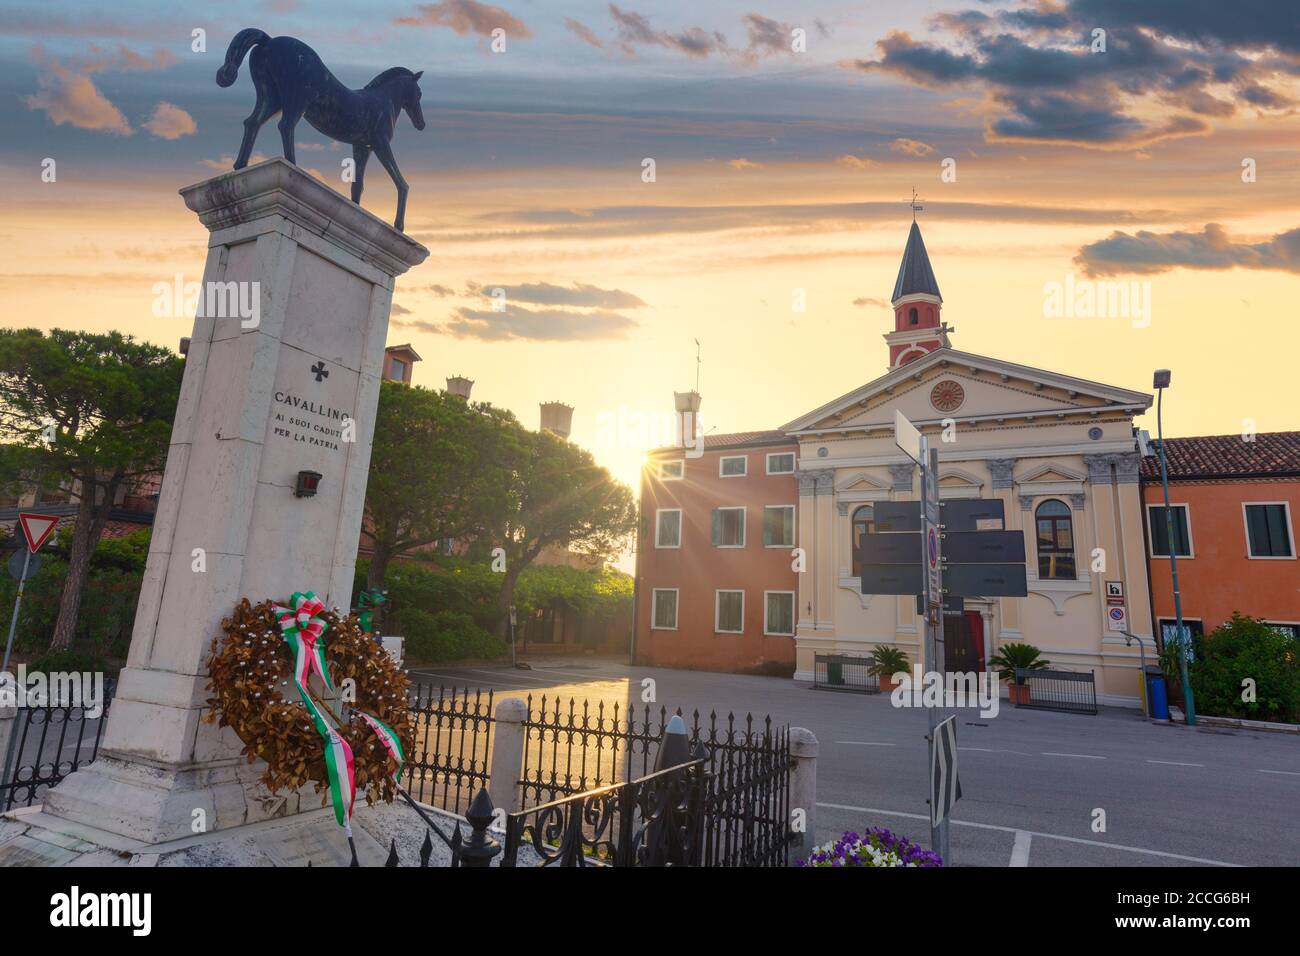 the monument to the fallen of the two world wars in the tourist resort of Cavallino Treporti, Venice, Italy Stock Photo